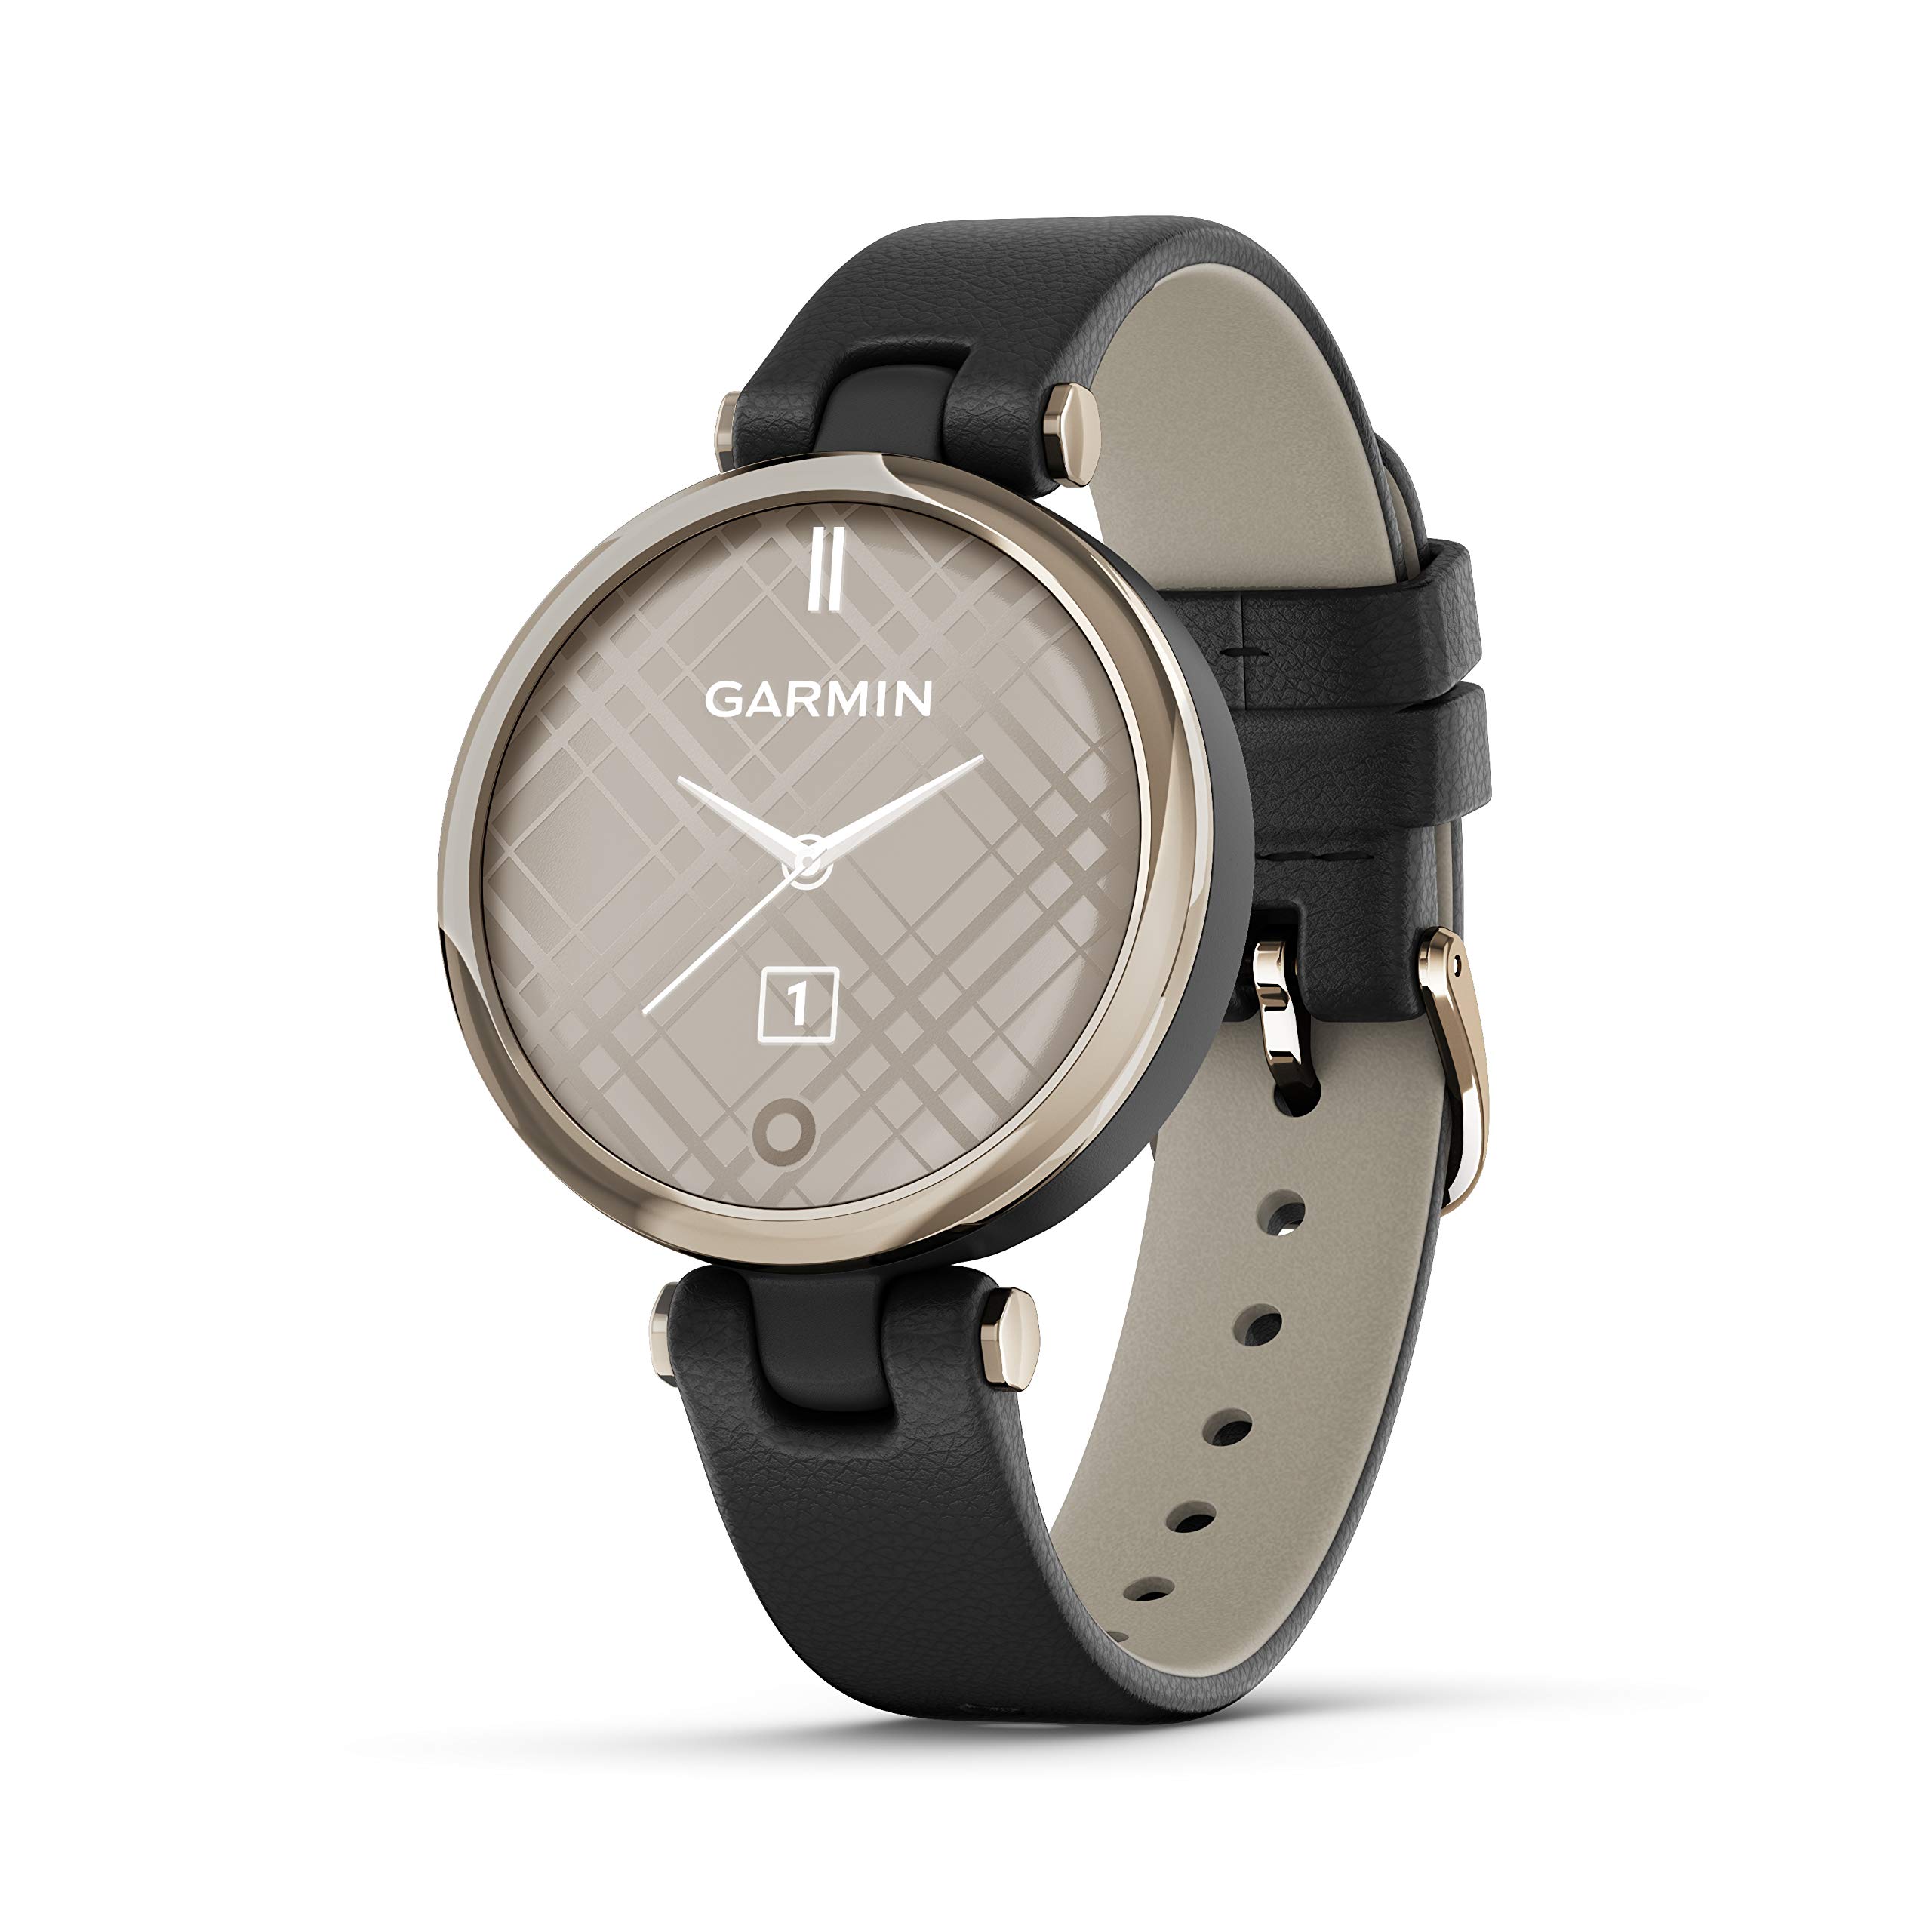 Garmin Lily™, Small Smartwatch with Touchscreen and Patterned Lens, Light Gold with Black Leather Band, 1 inch